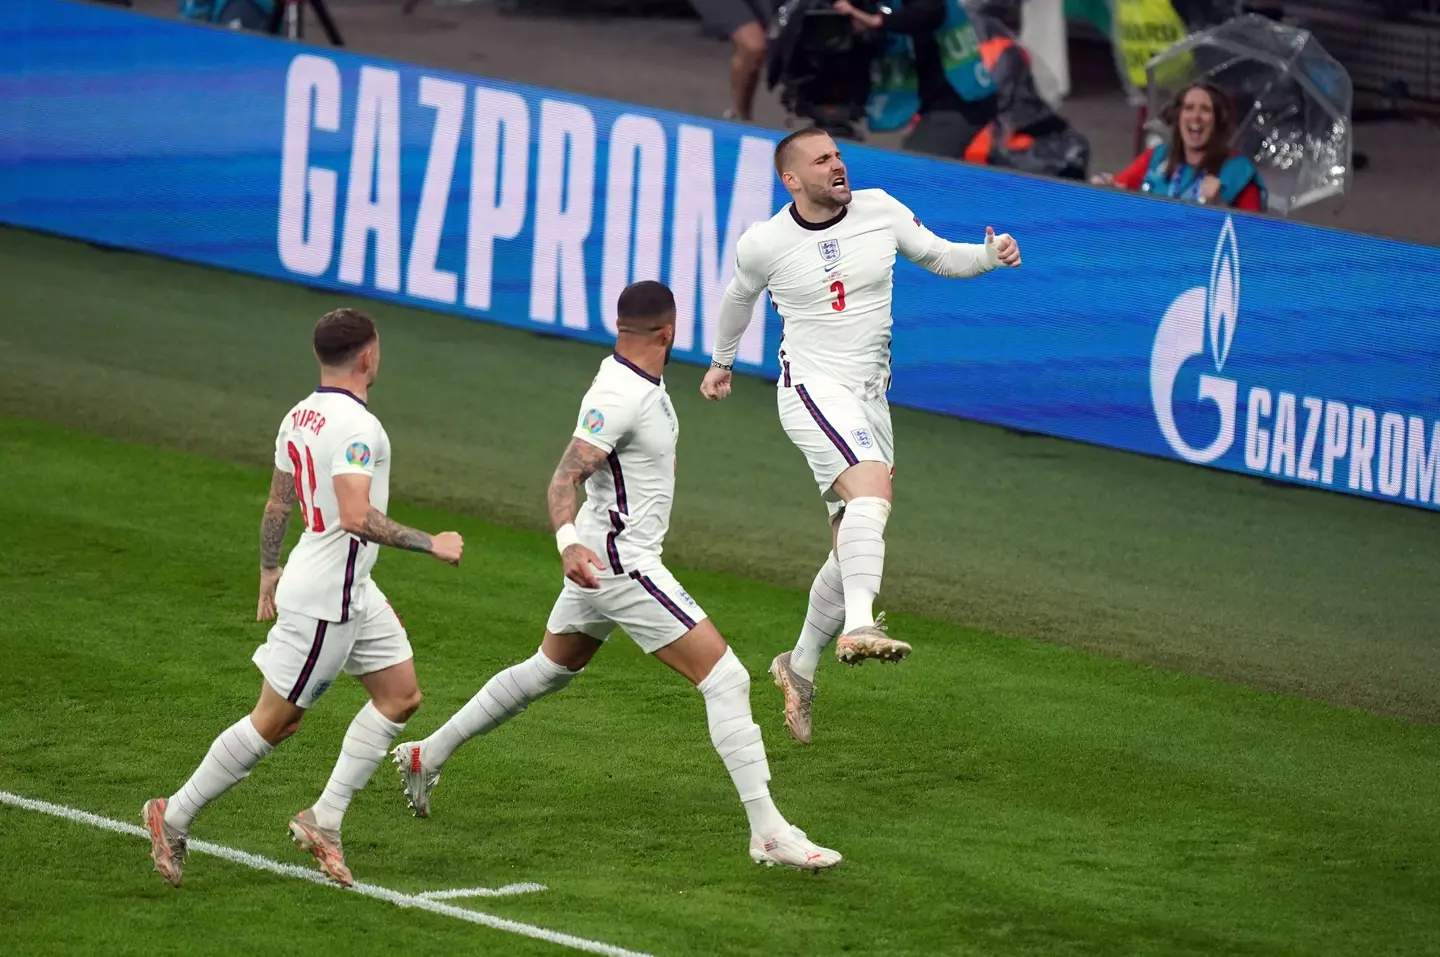 Luke Shaw celebrating his goal for England in the Euro 2020 final against Italy |